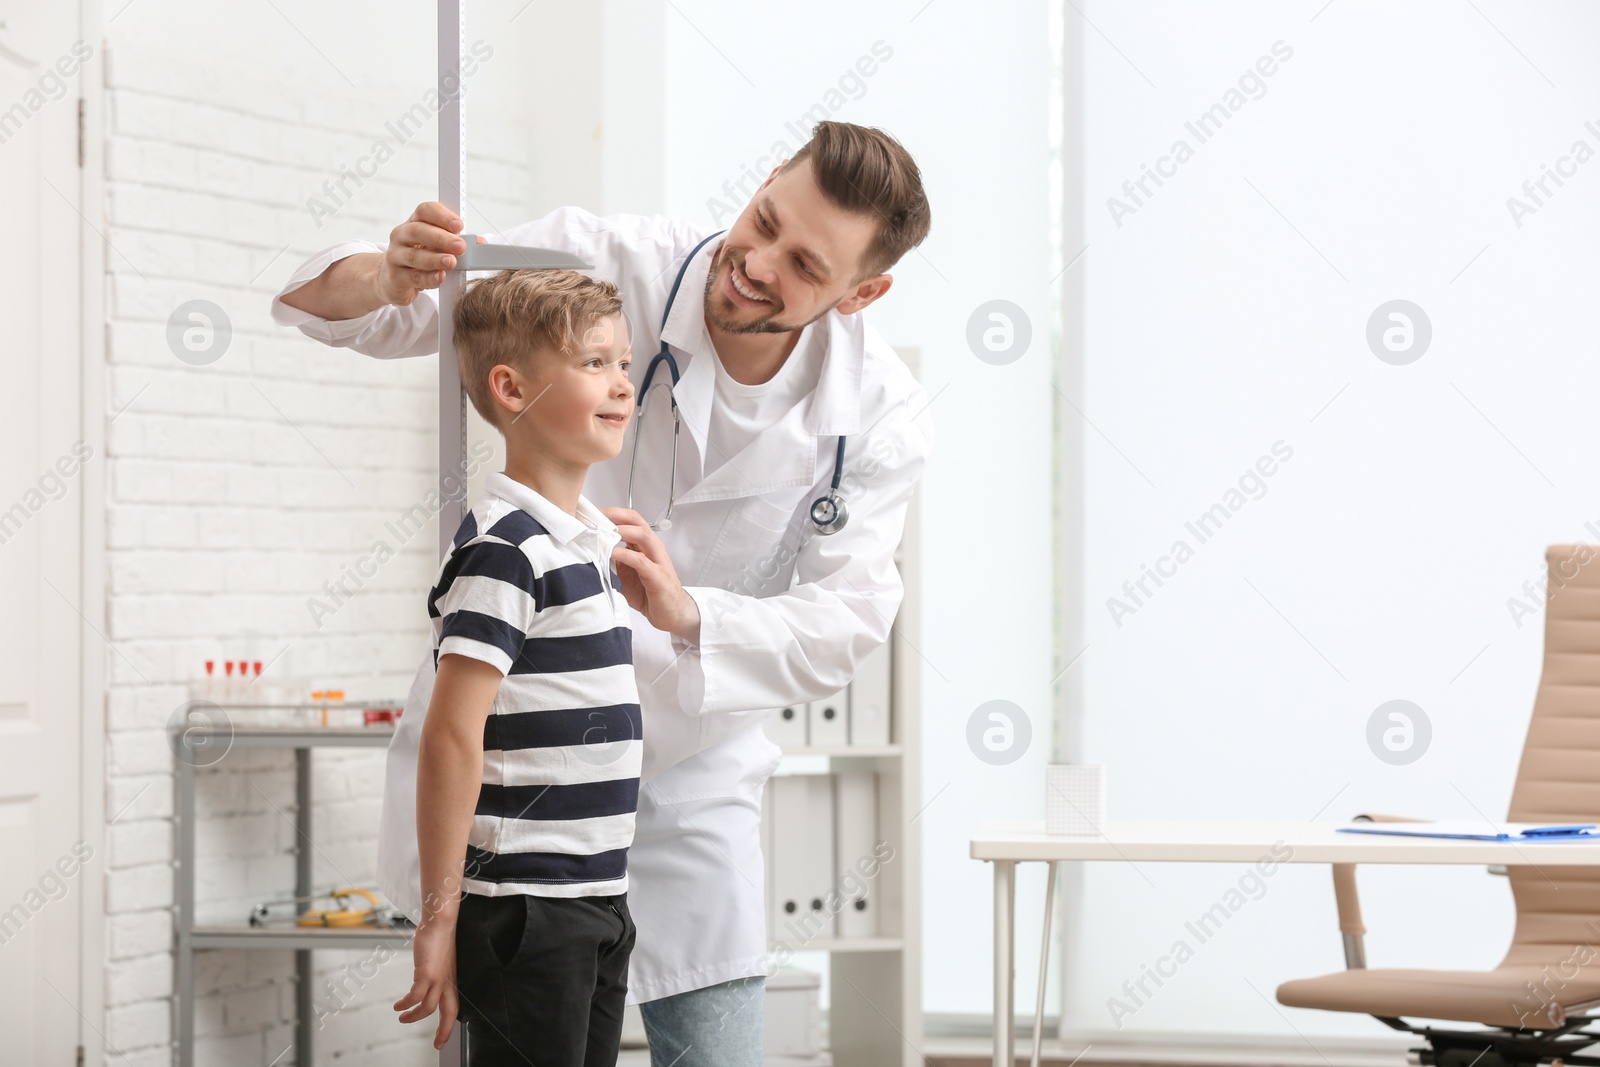 Photo of Doctor measuring little boy's height in hospital